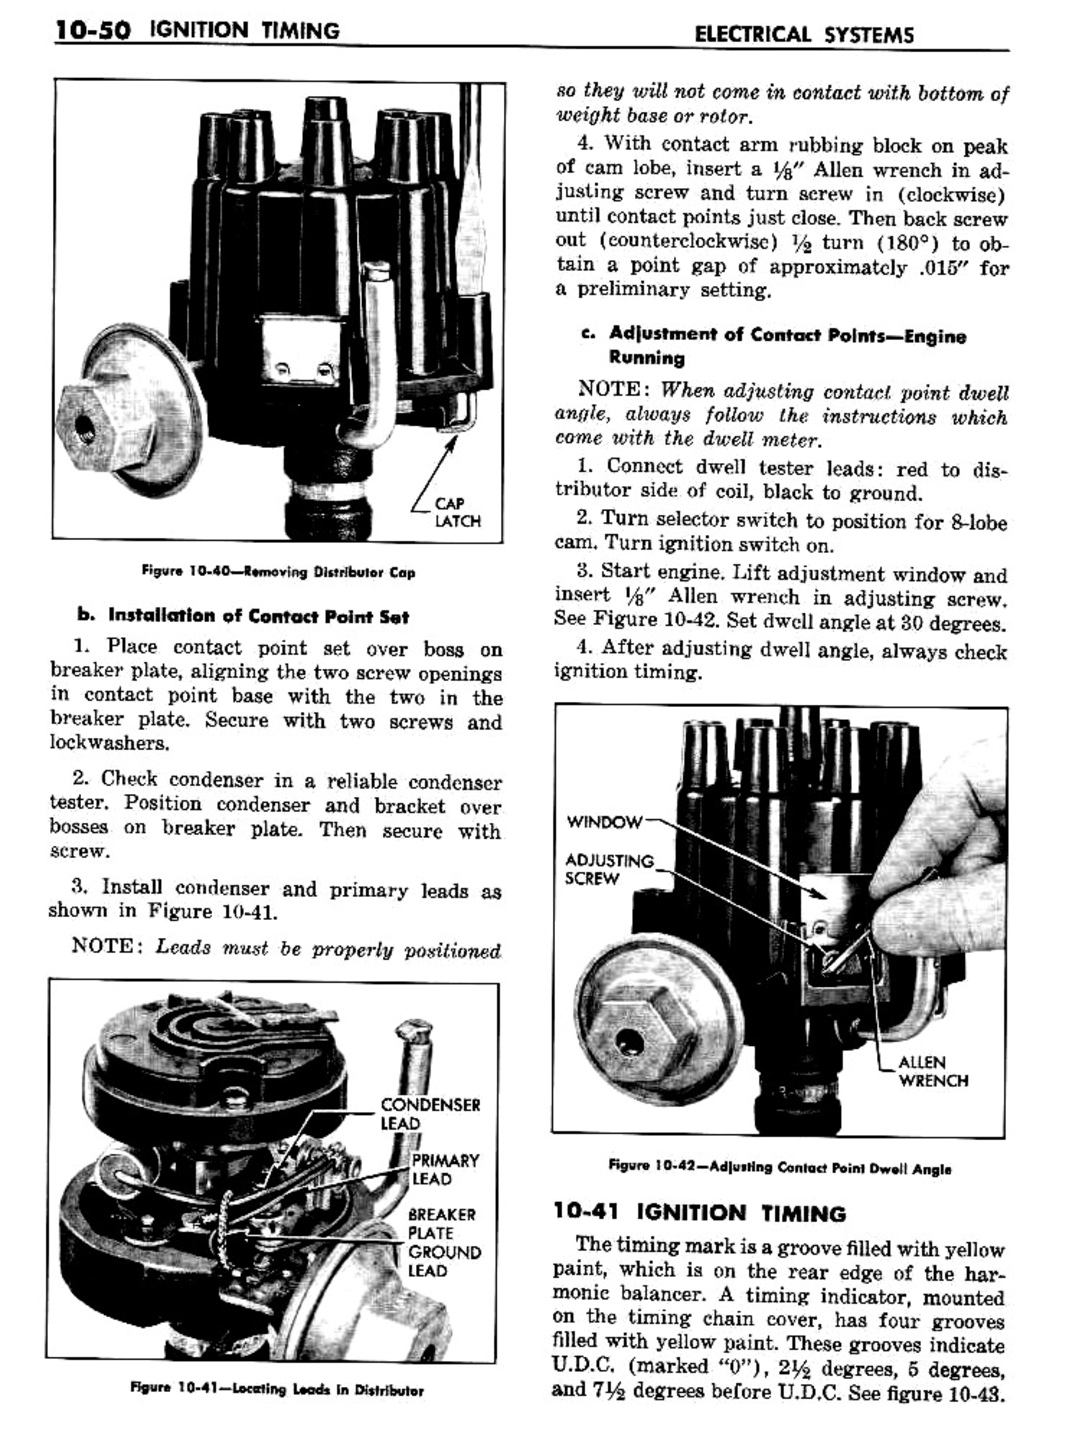 n_11 1957 Buick Shop Manual - Electrical Systems-050-050.jpg